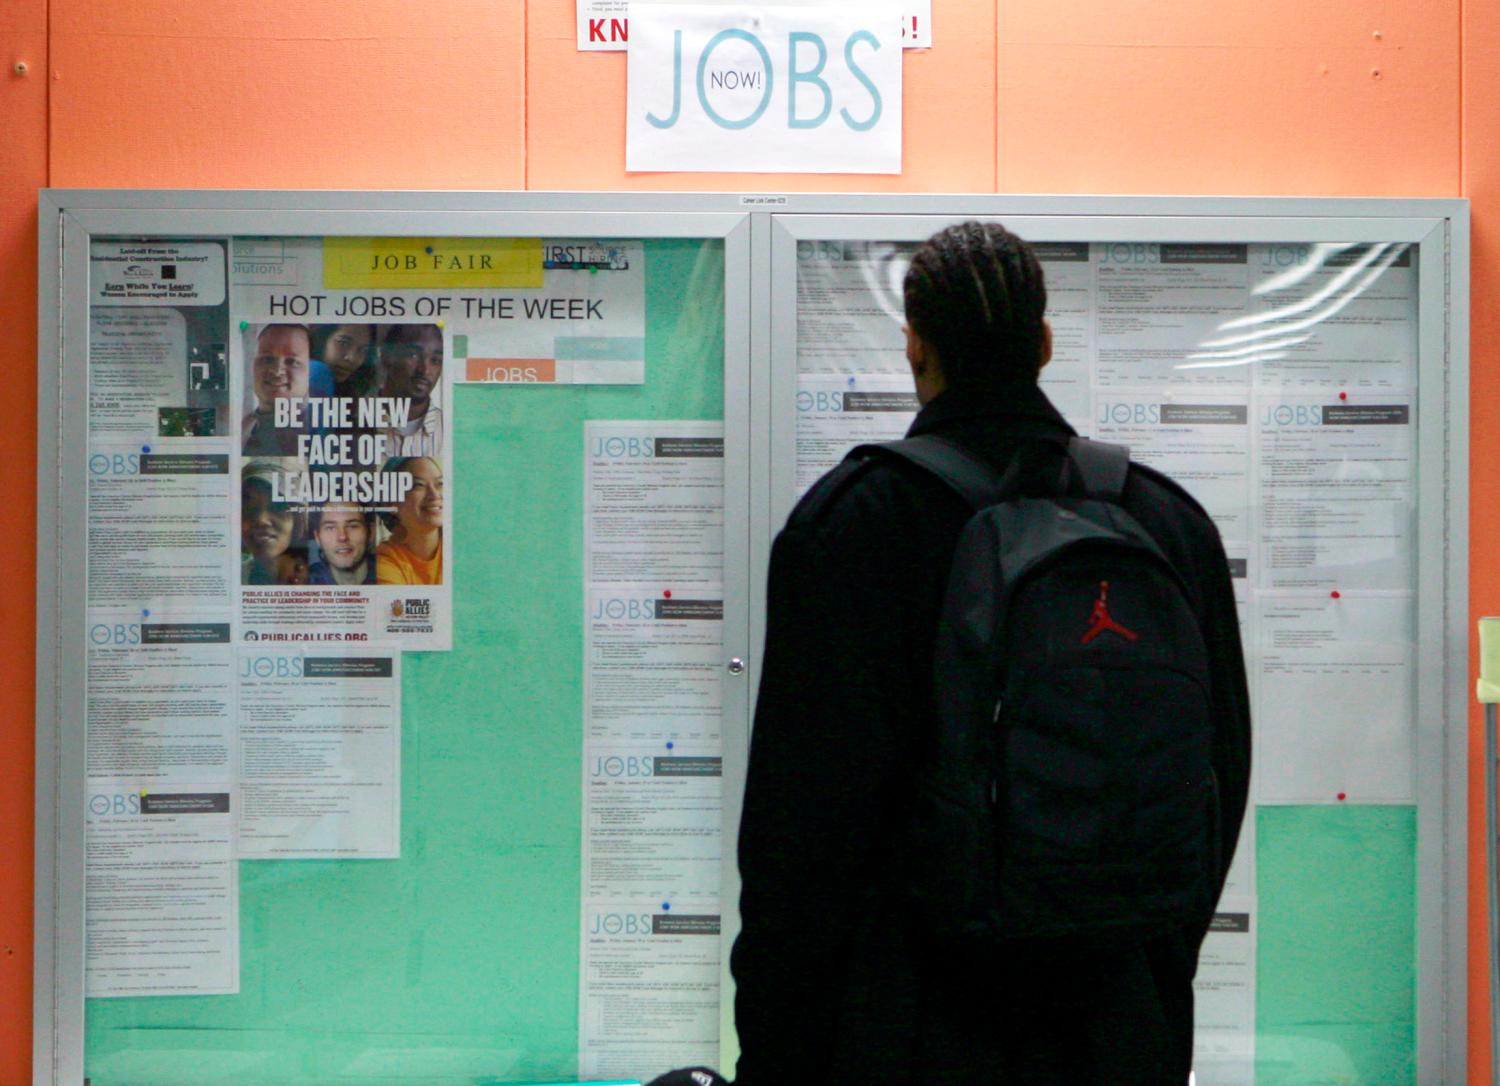 A man looks over employment opportunities at a jobs center in San Francisco, California, in this February 4, 2010 file photo. The number of people filing new claims for unemployment insurance unexpectedly rose in the latest week to its highest level in close to six months, the U.S. Labor Department said on Thursday, August 12, 2010. The number of new claims for jobless benefits rose 2,000 to 484,000 in the week ended August 7, the second straight increase. REUTERS/Robert Galbraith/Files  (UNITED STATES - Tags: BUSINESS EMPLOYMENT SOCIETY) - GM1E68C1MMJ01